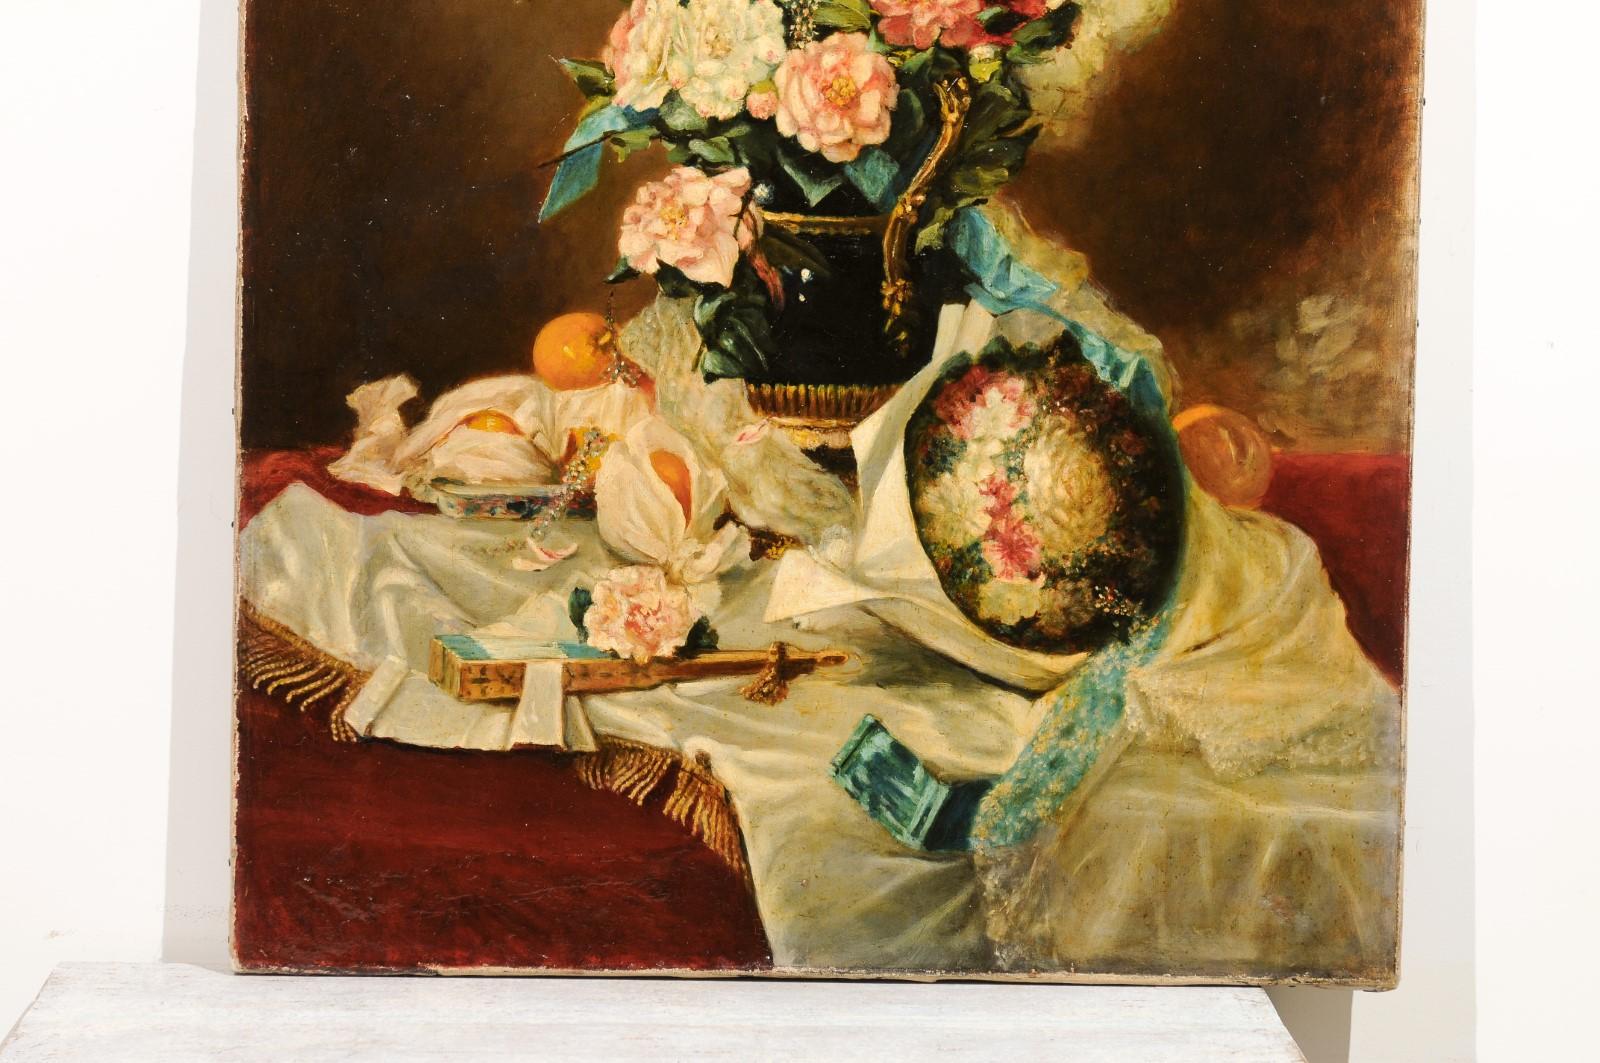 18th Century French 1790s Oil on Canvas Painting with Floral Bouquet, Fruits and Embroidery For Sale